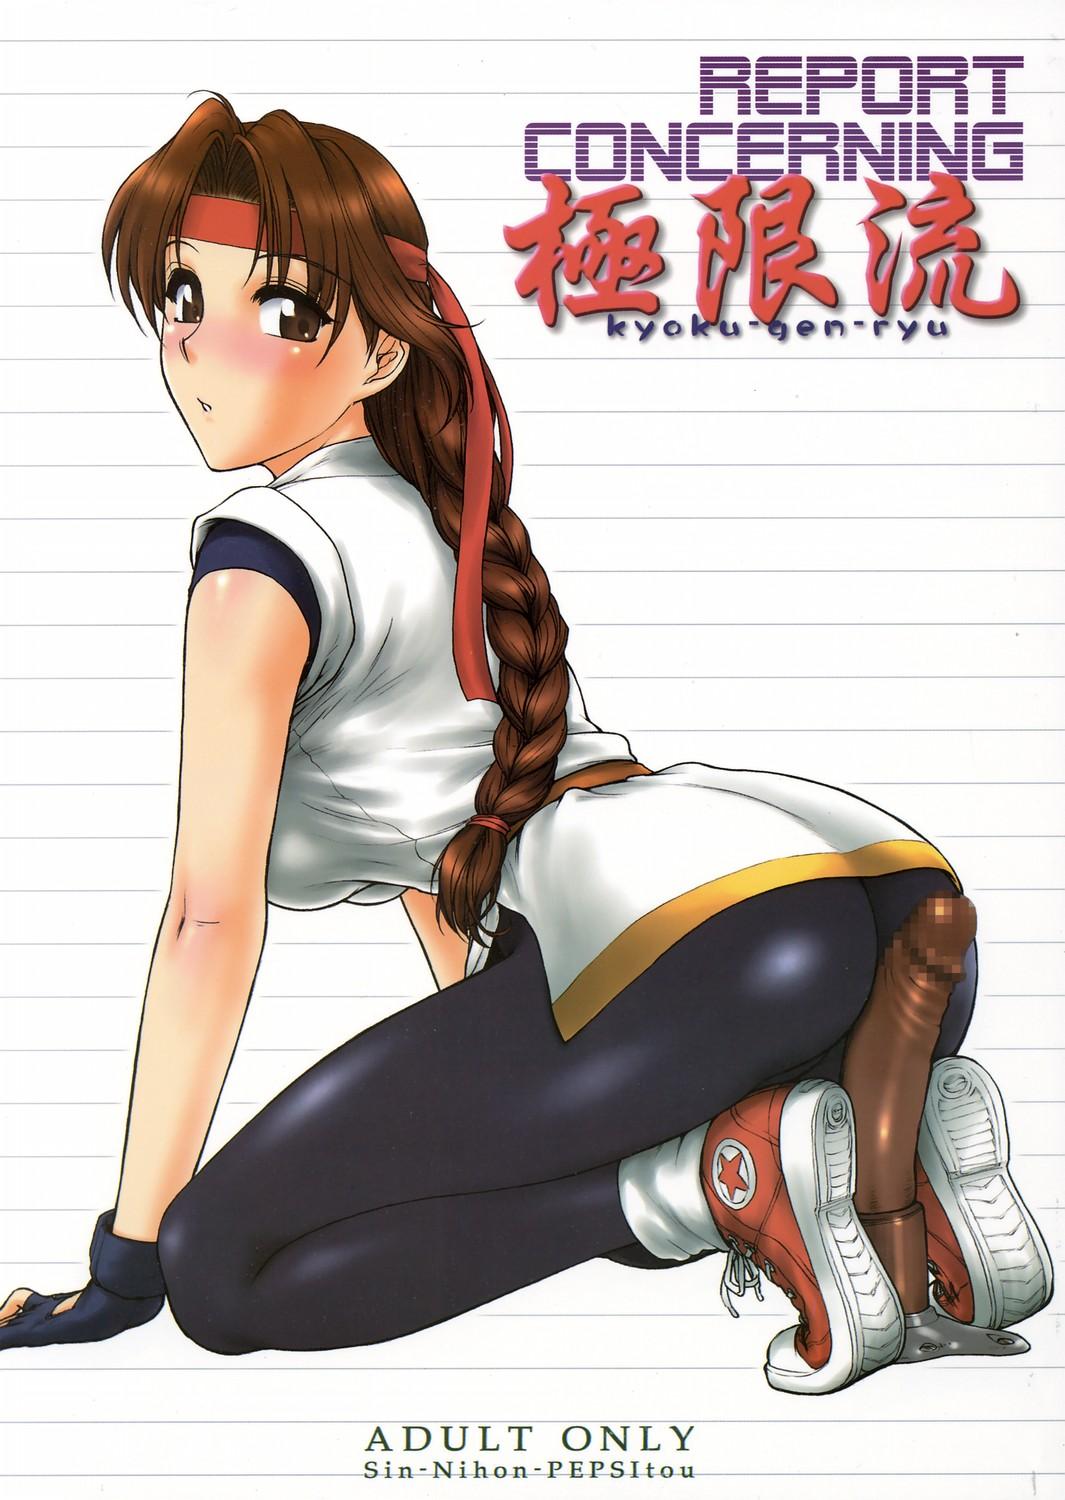 (SC29) [Shinnihon Pepsitou (St. Germain-sal)] Report Concerning Kyoku-gen-ryuu (The King of Fighters)  [Chinese] [日祈漢化] 1